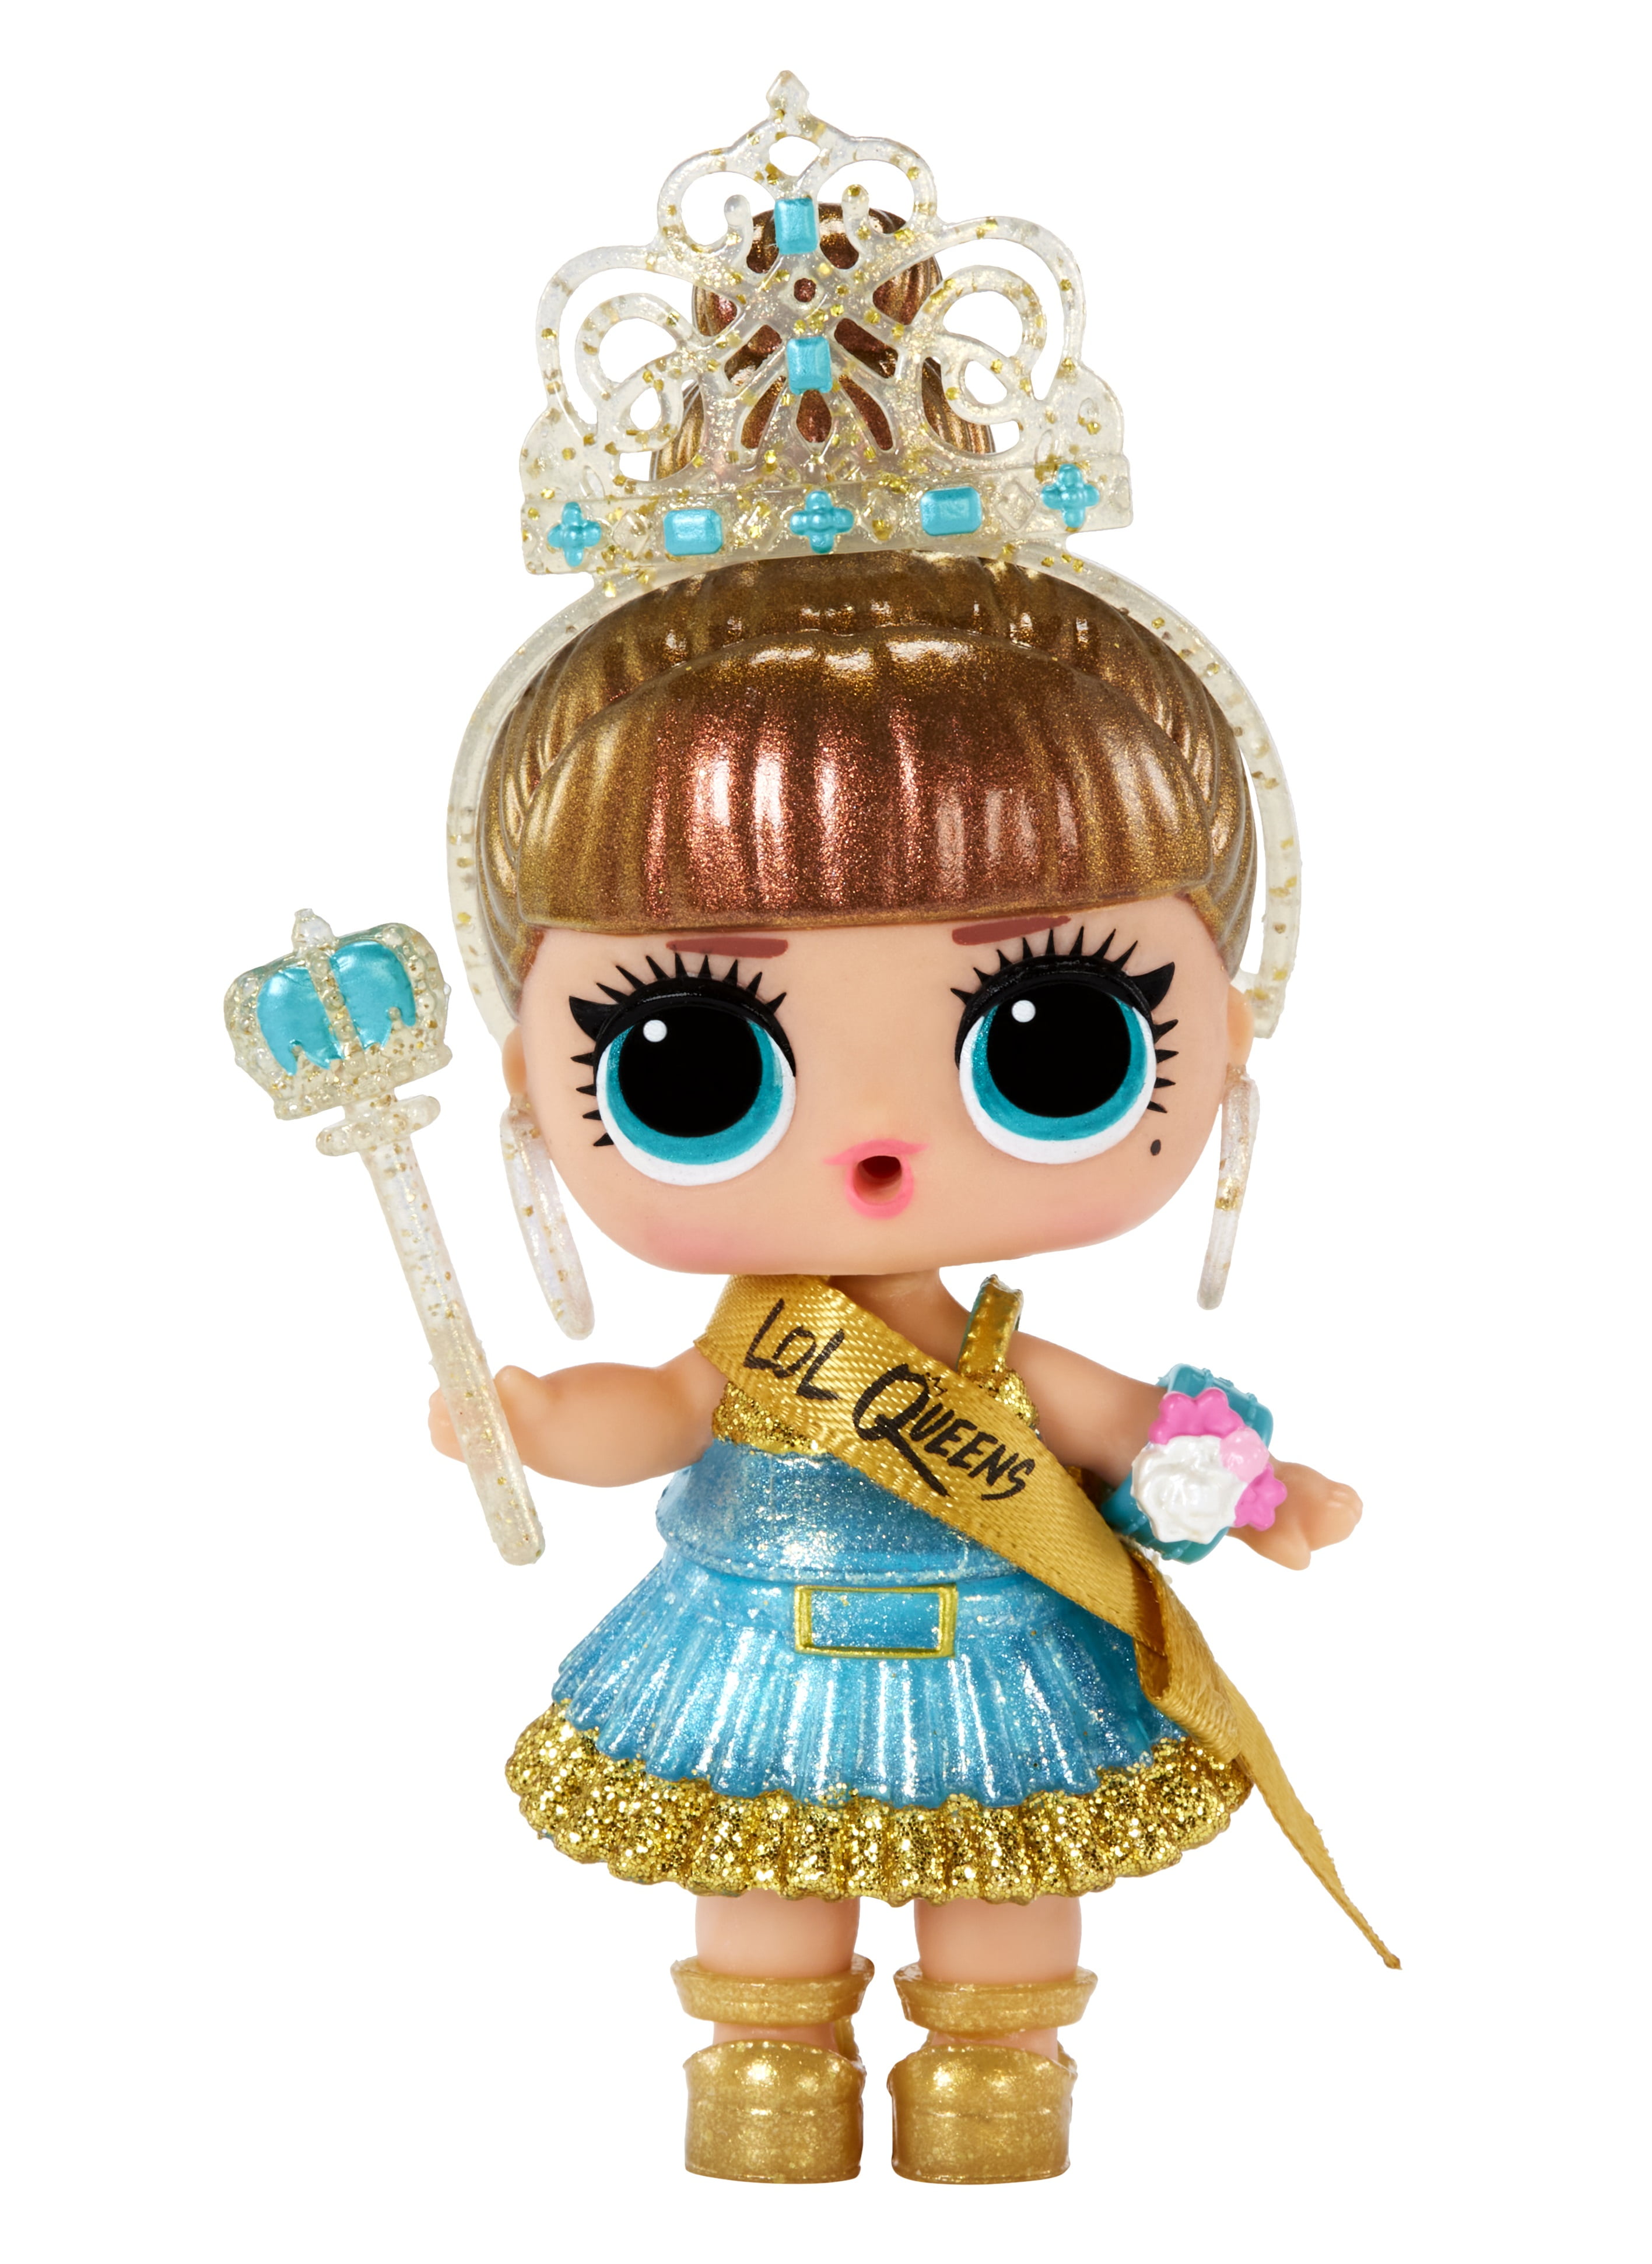 L.O.L Surprise! LOL Surprise Queens Dolls with 9 Surprises Including Doll, Fashions, and Royal Themed Accessories - Great Gift for Girls Age 4+